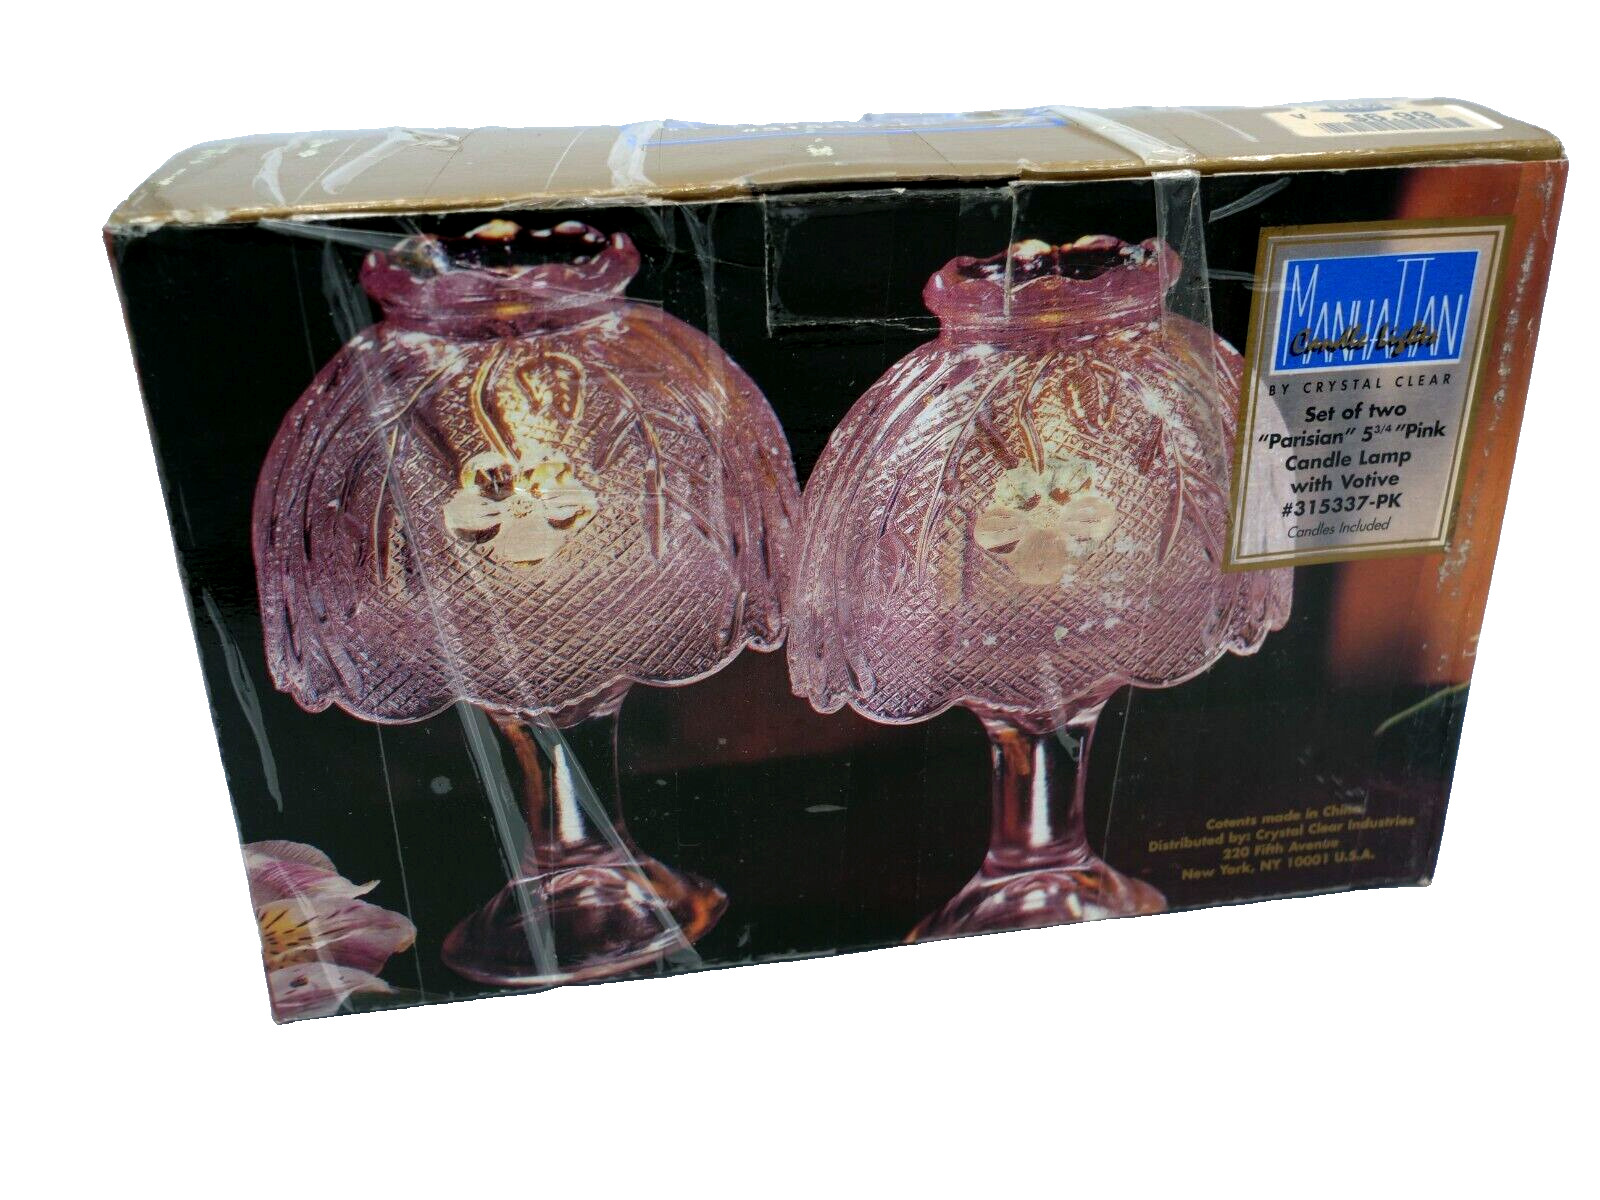 2 Manhattan Candle Lights By Crystal Clear Pink Parisian Lamps 5 3/4\